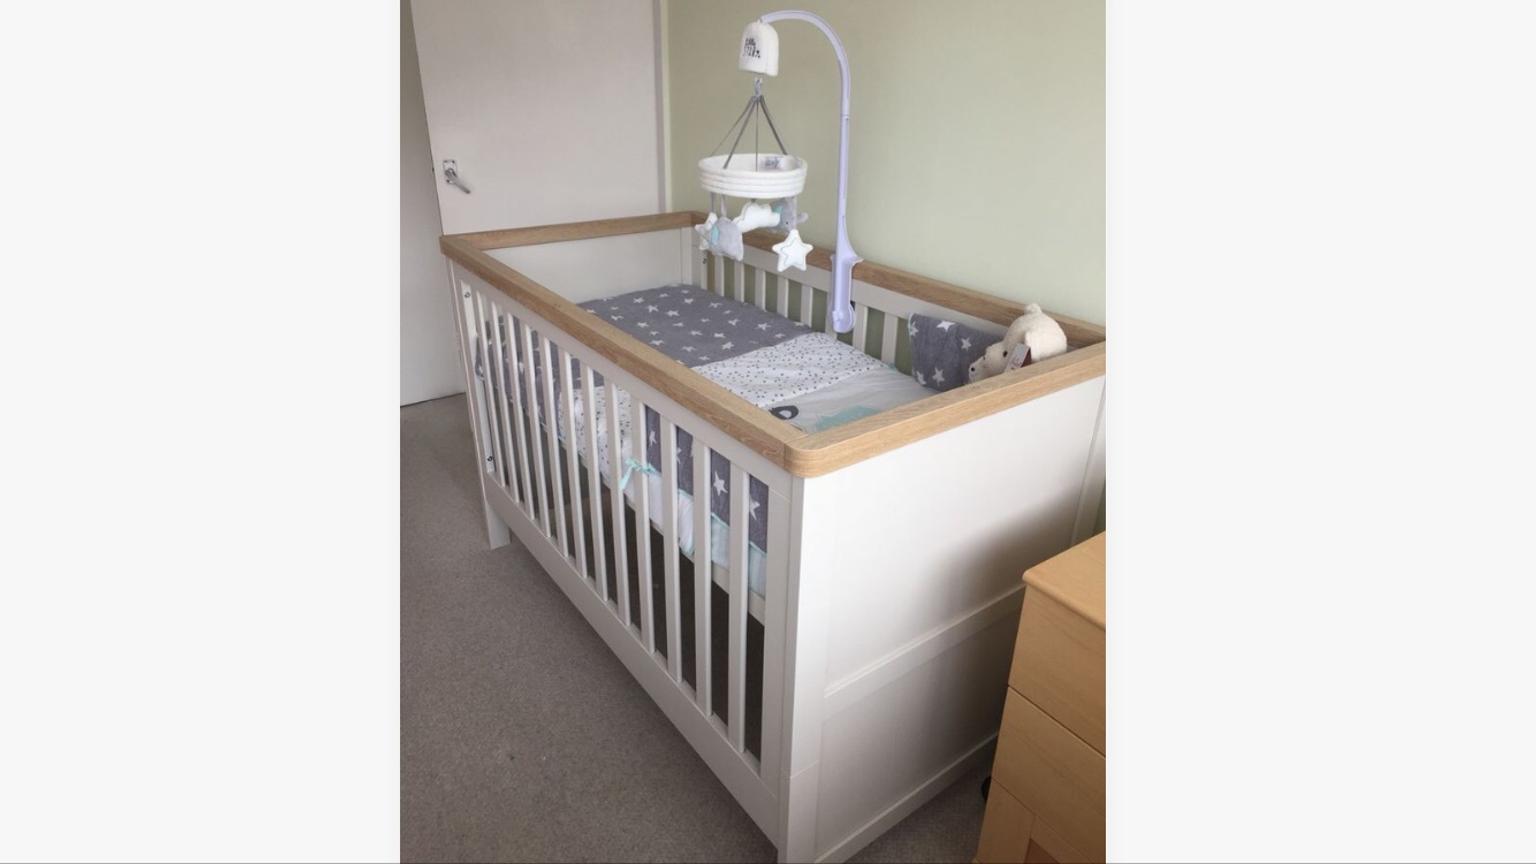 lulworth cot bed